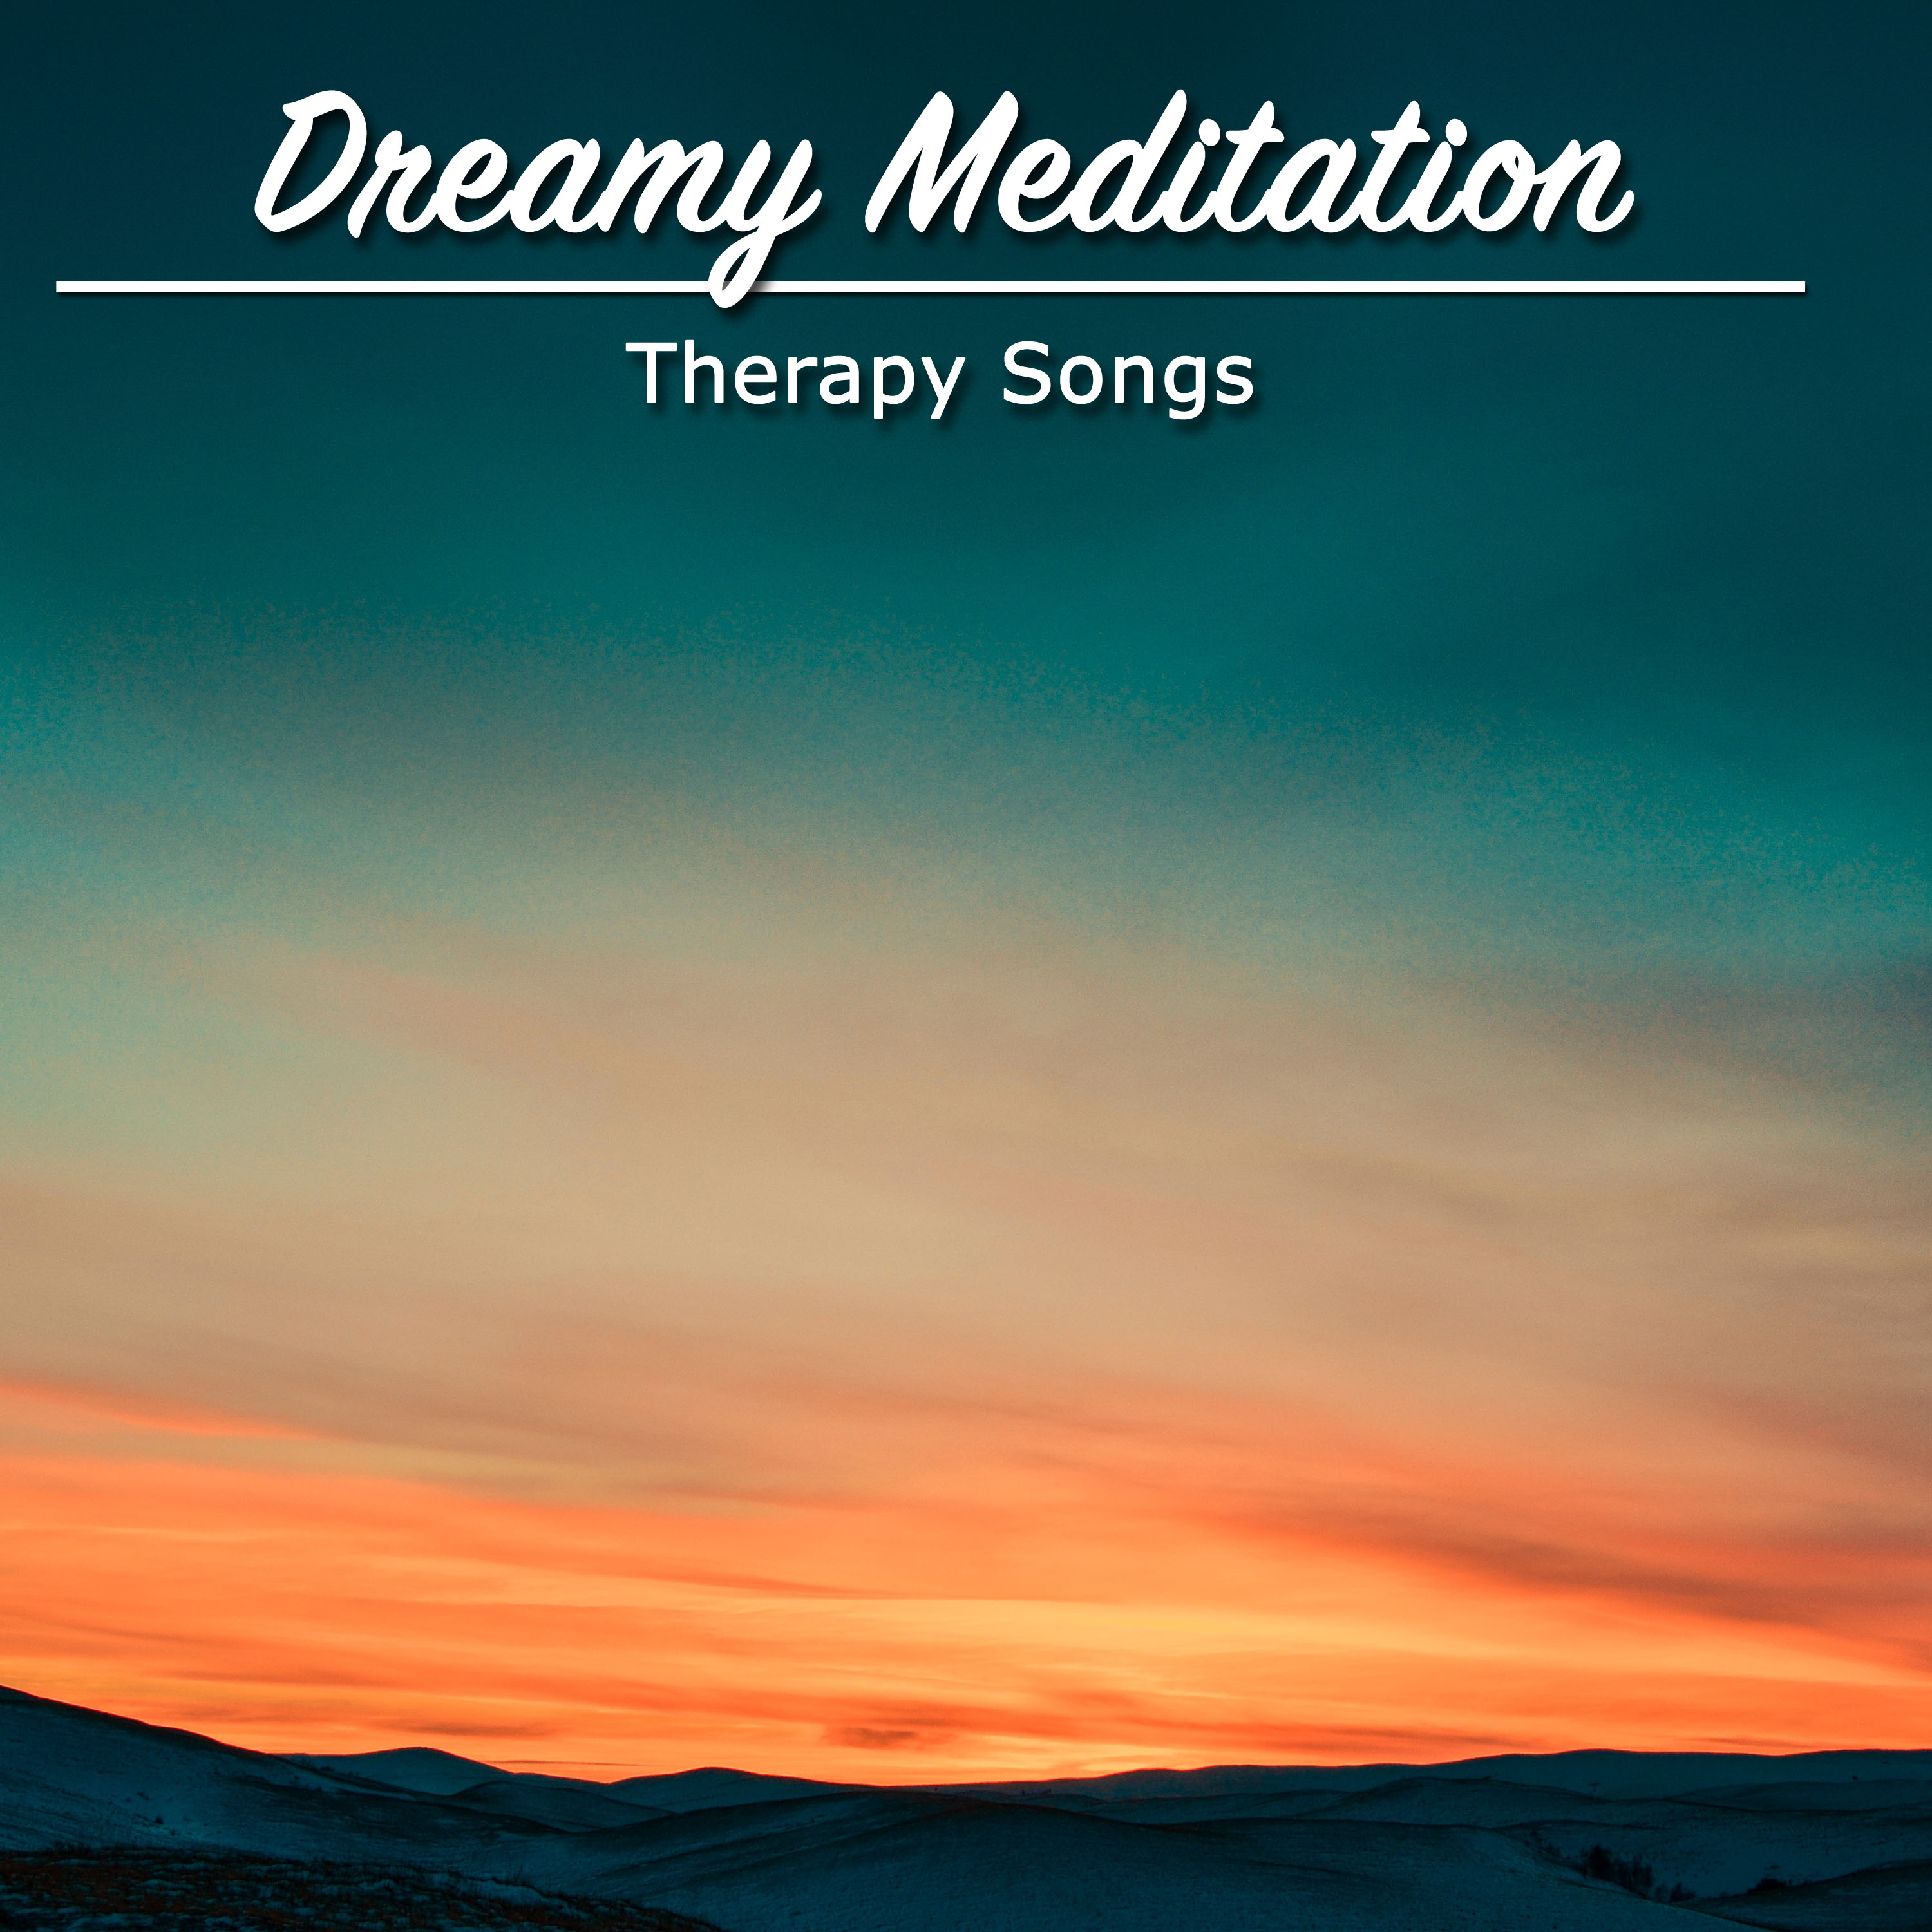 15 Dreamy Meditaiton and Therapy Songs